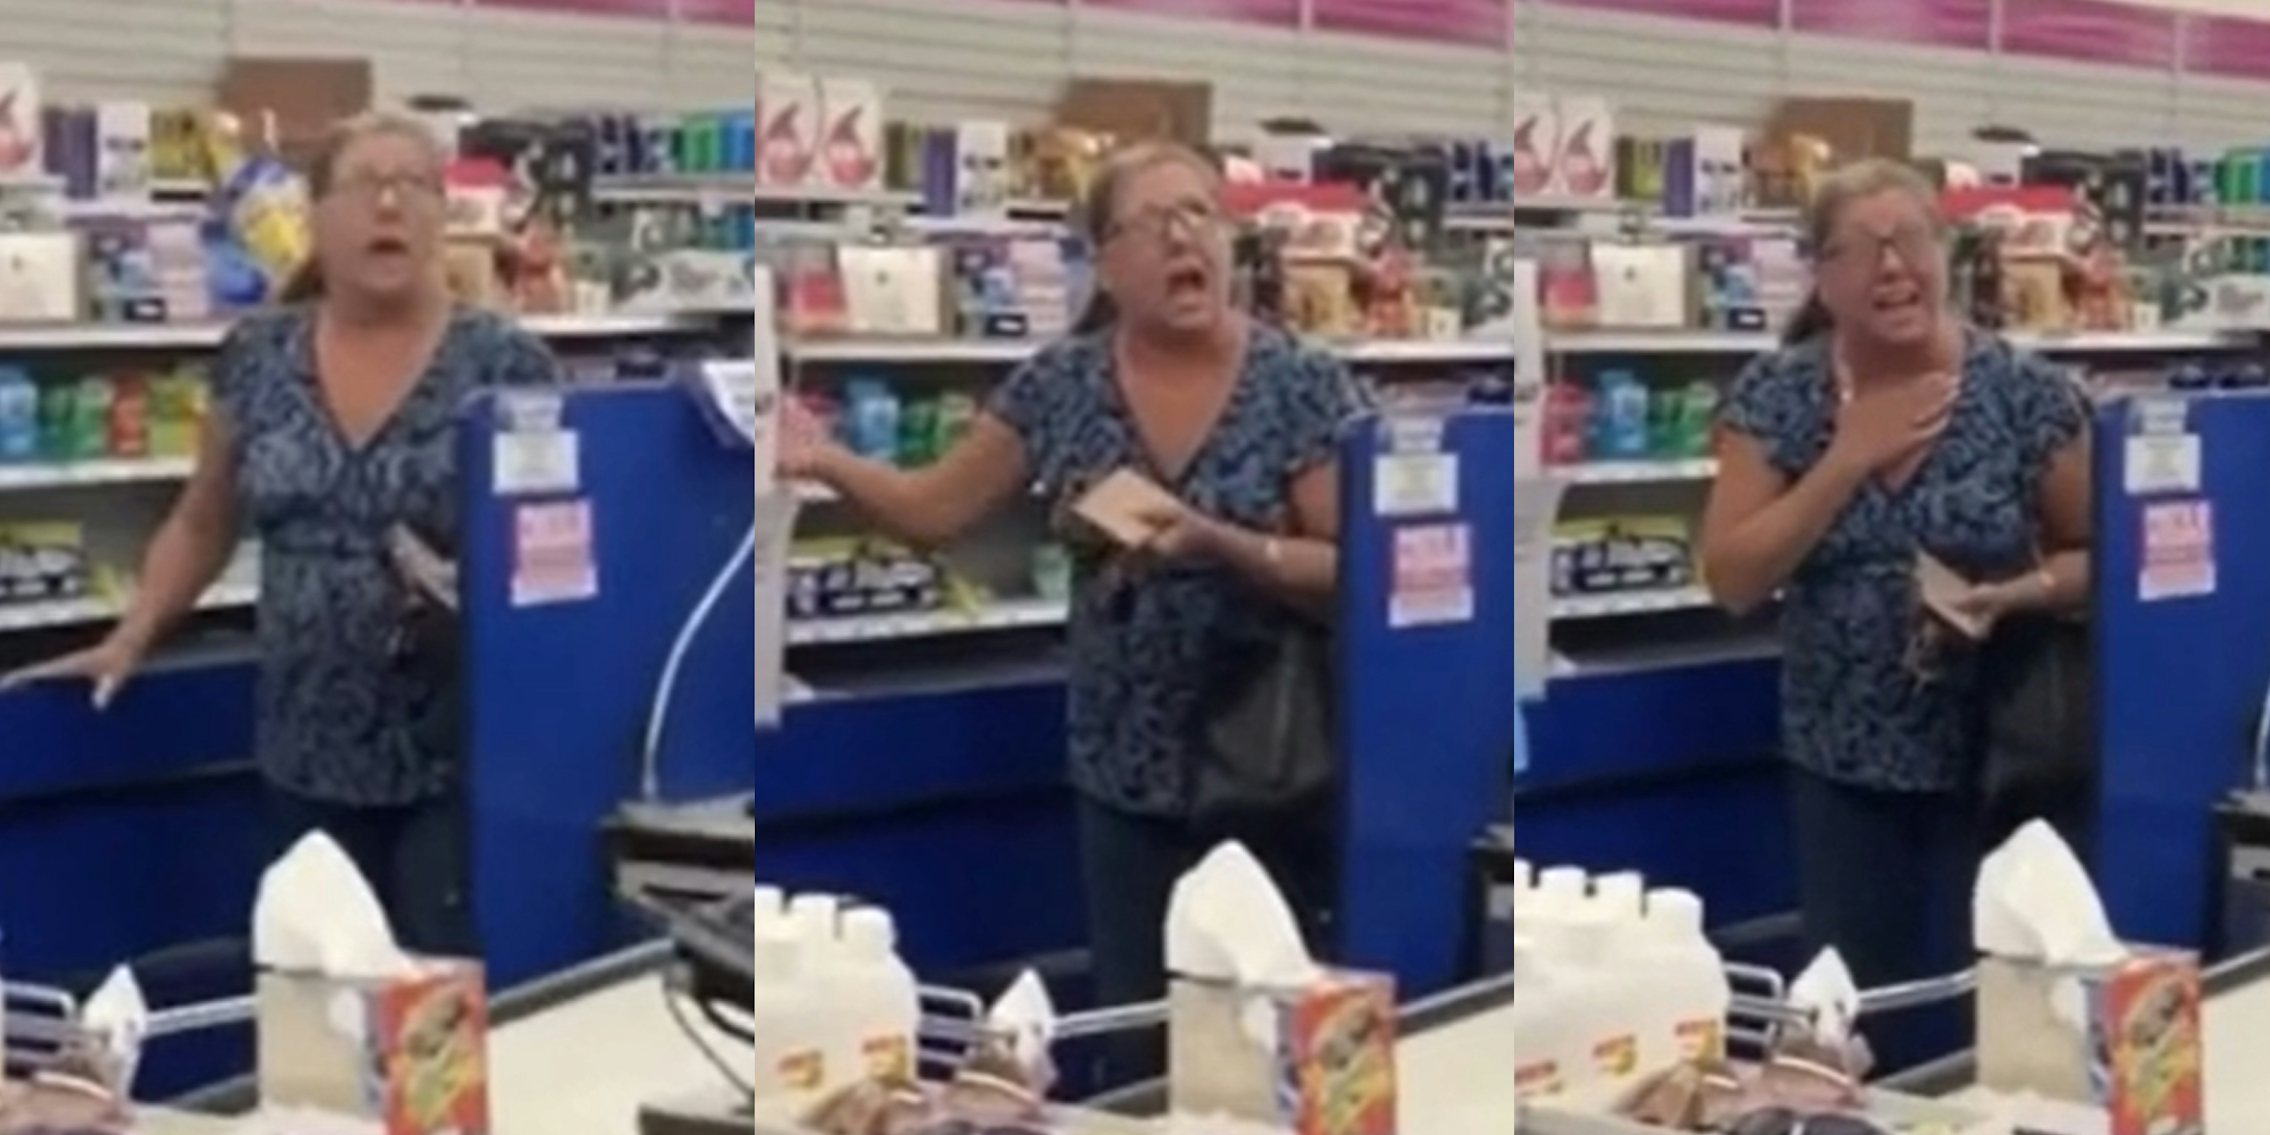 woman in 99 cent store screaming about not wearing a mask